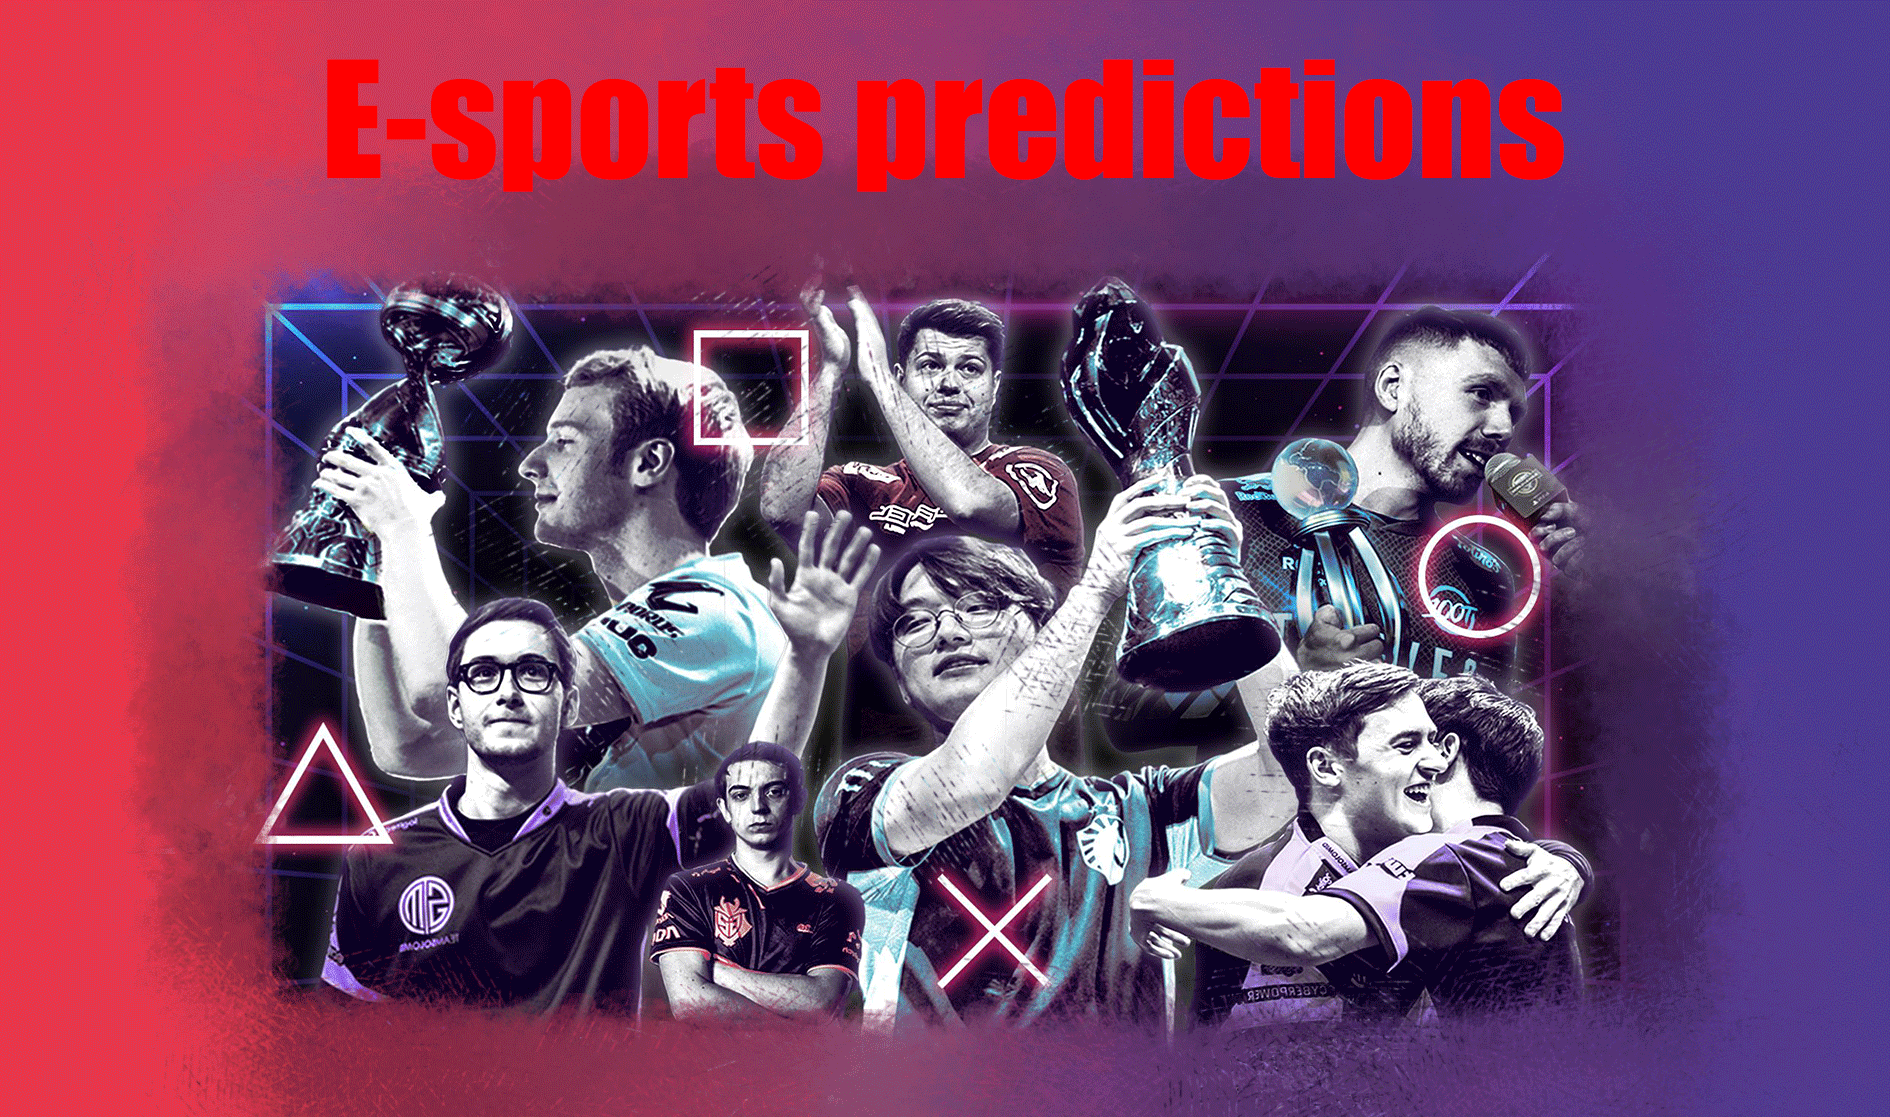 How do Esports predictions play a major role?